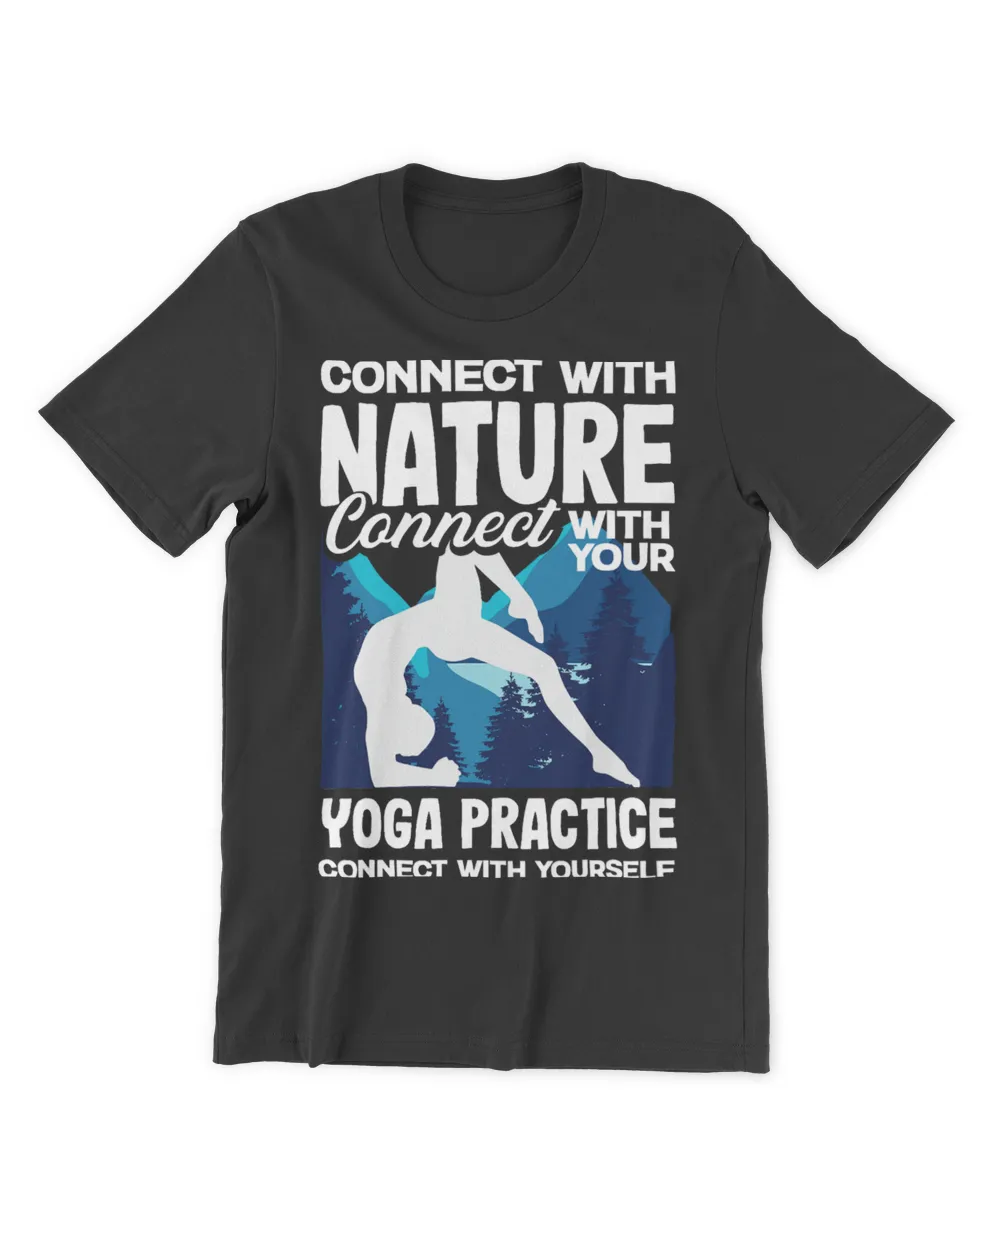 Connect with nature connect with your yoga practice